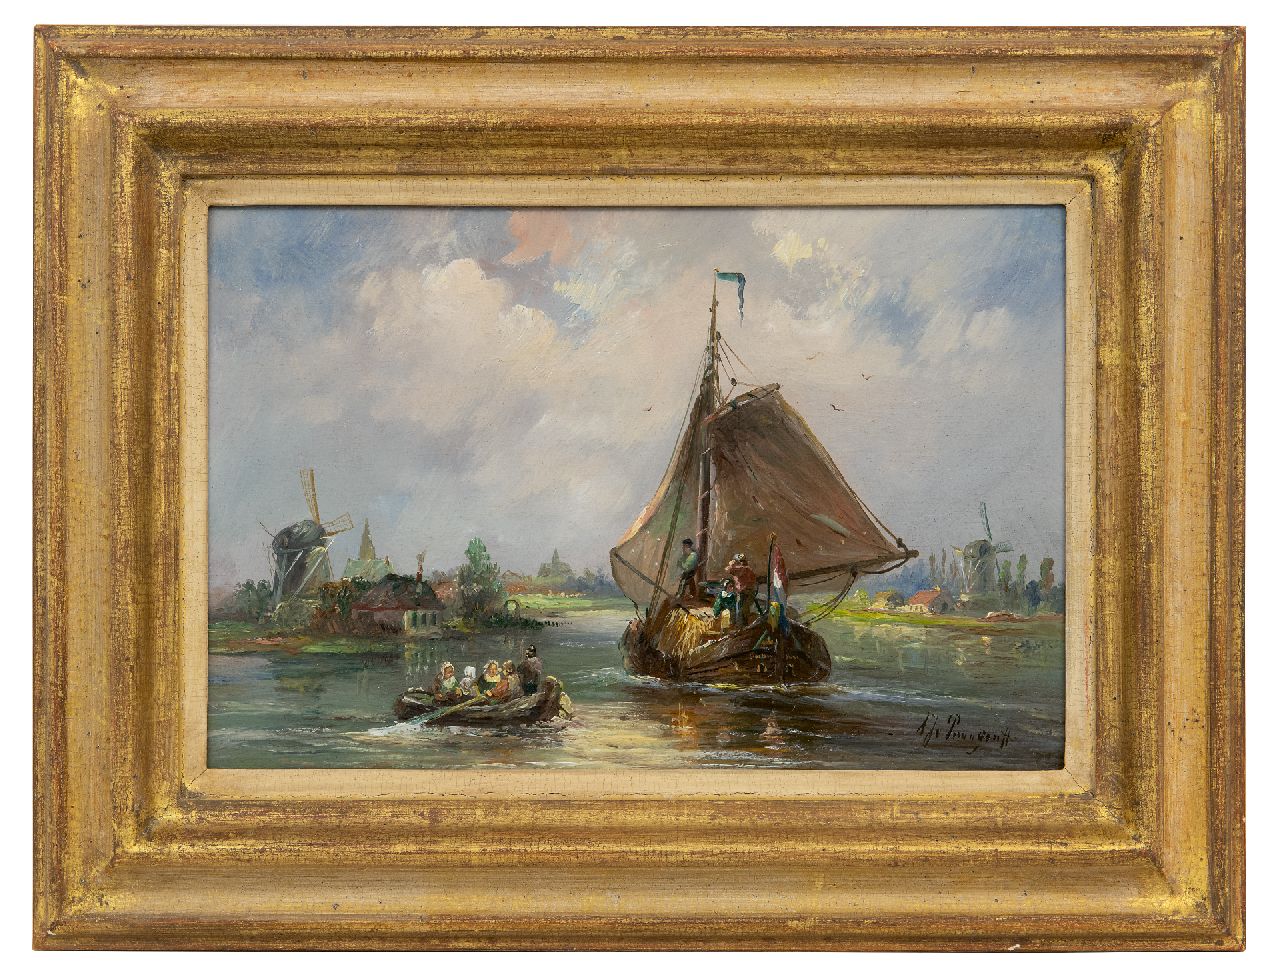 Prooijen A.J. van | Albert Jurardus van Prooijen | Paintings offered for sale | A view of a river with a hayship, oil on panel 21.2 x 32.0 cm, signed l.r.